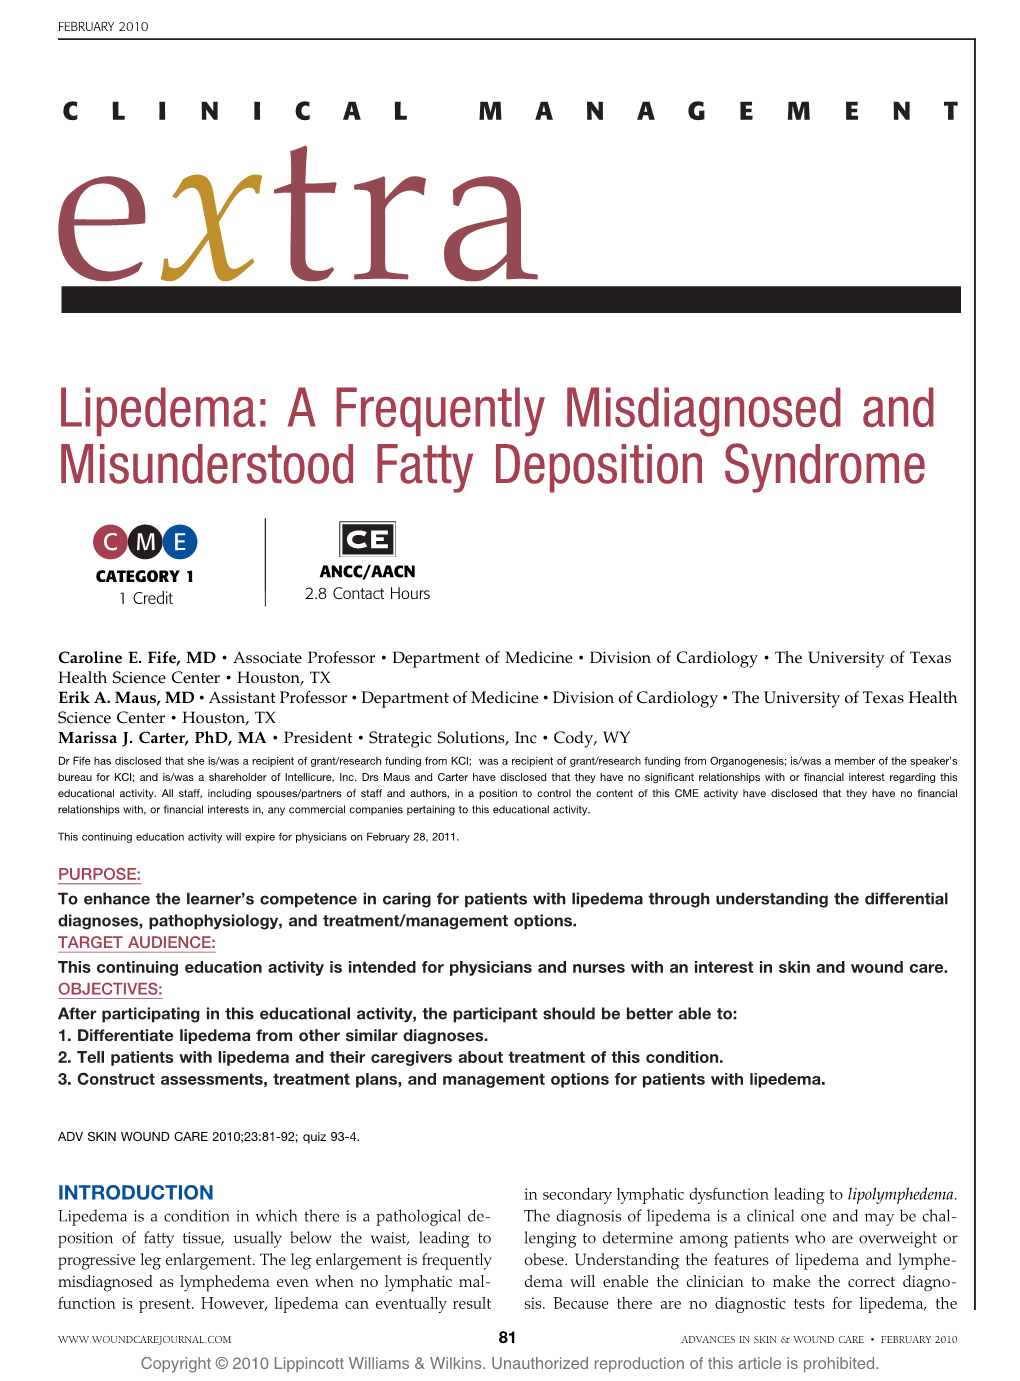 Lipedema: a Frequently Misdiagnosed and Misunderstood Fatty Deposition Syndrome